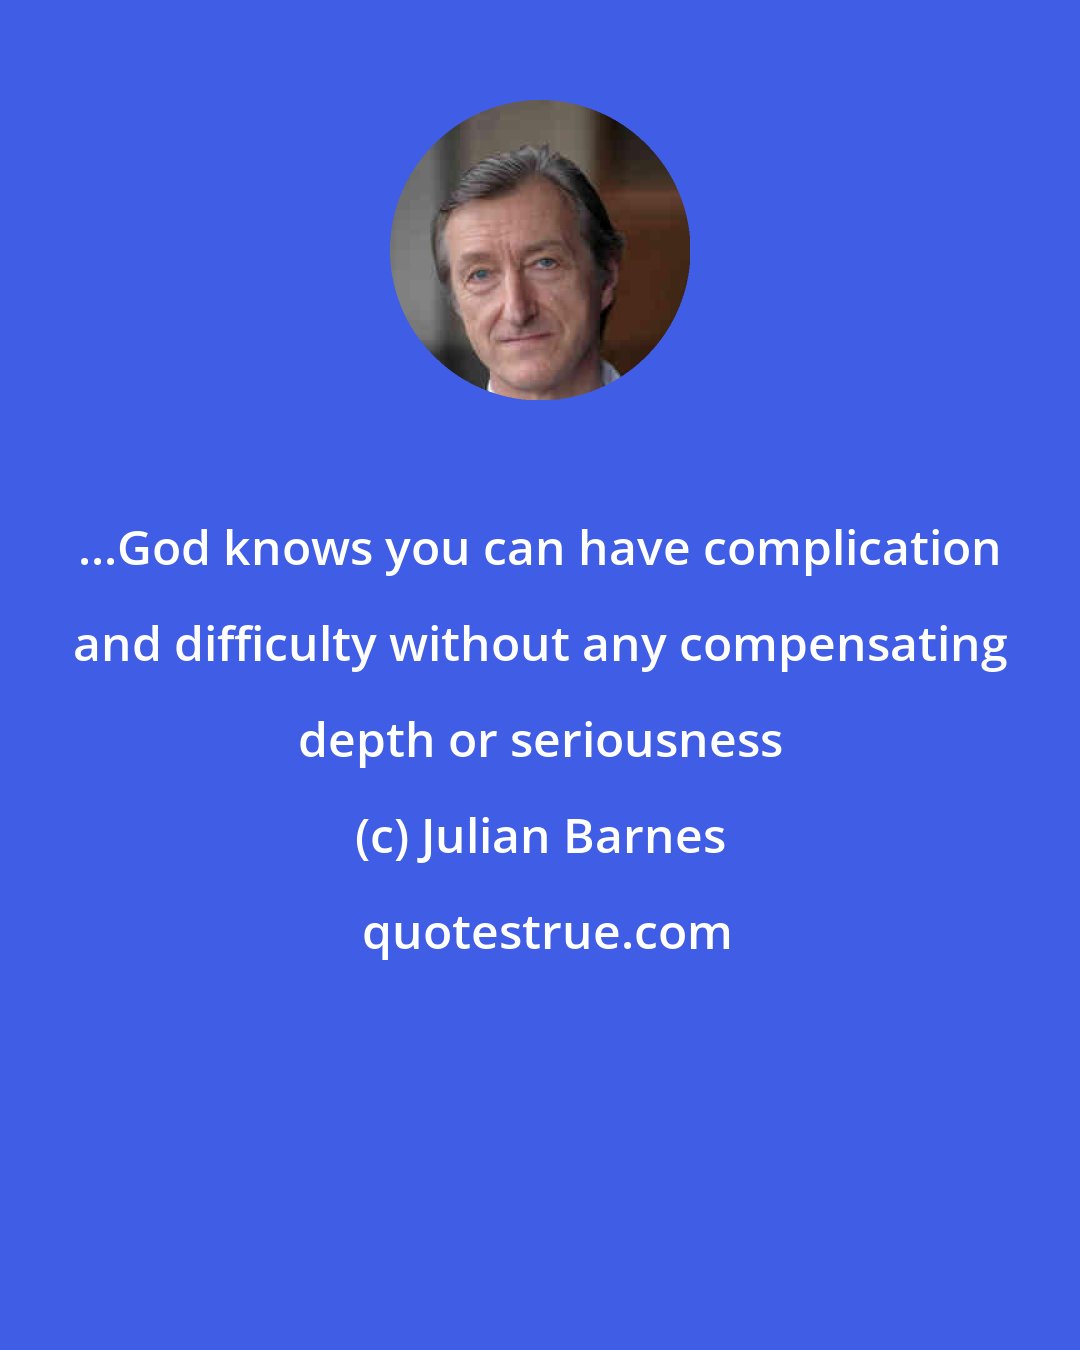 Julian Barnes: ...God knows you can have complication and difficulty without any compensating depth or seriousness